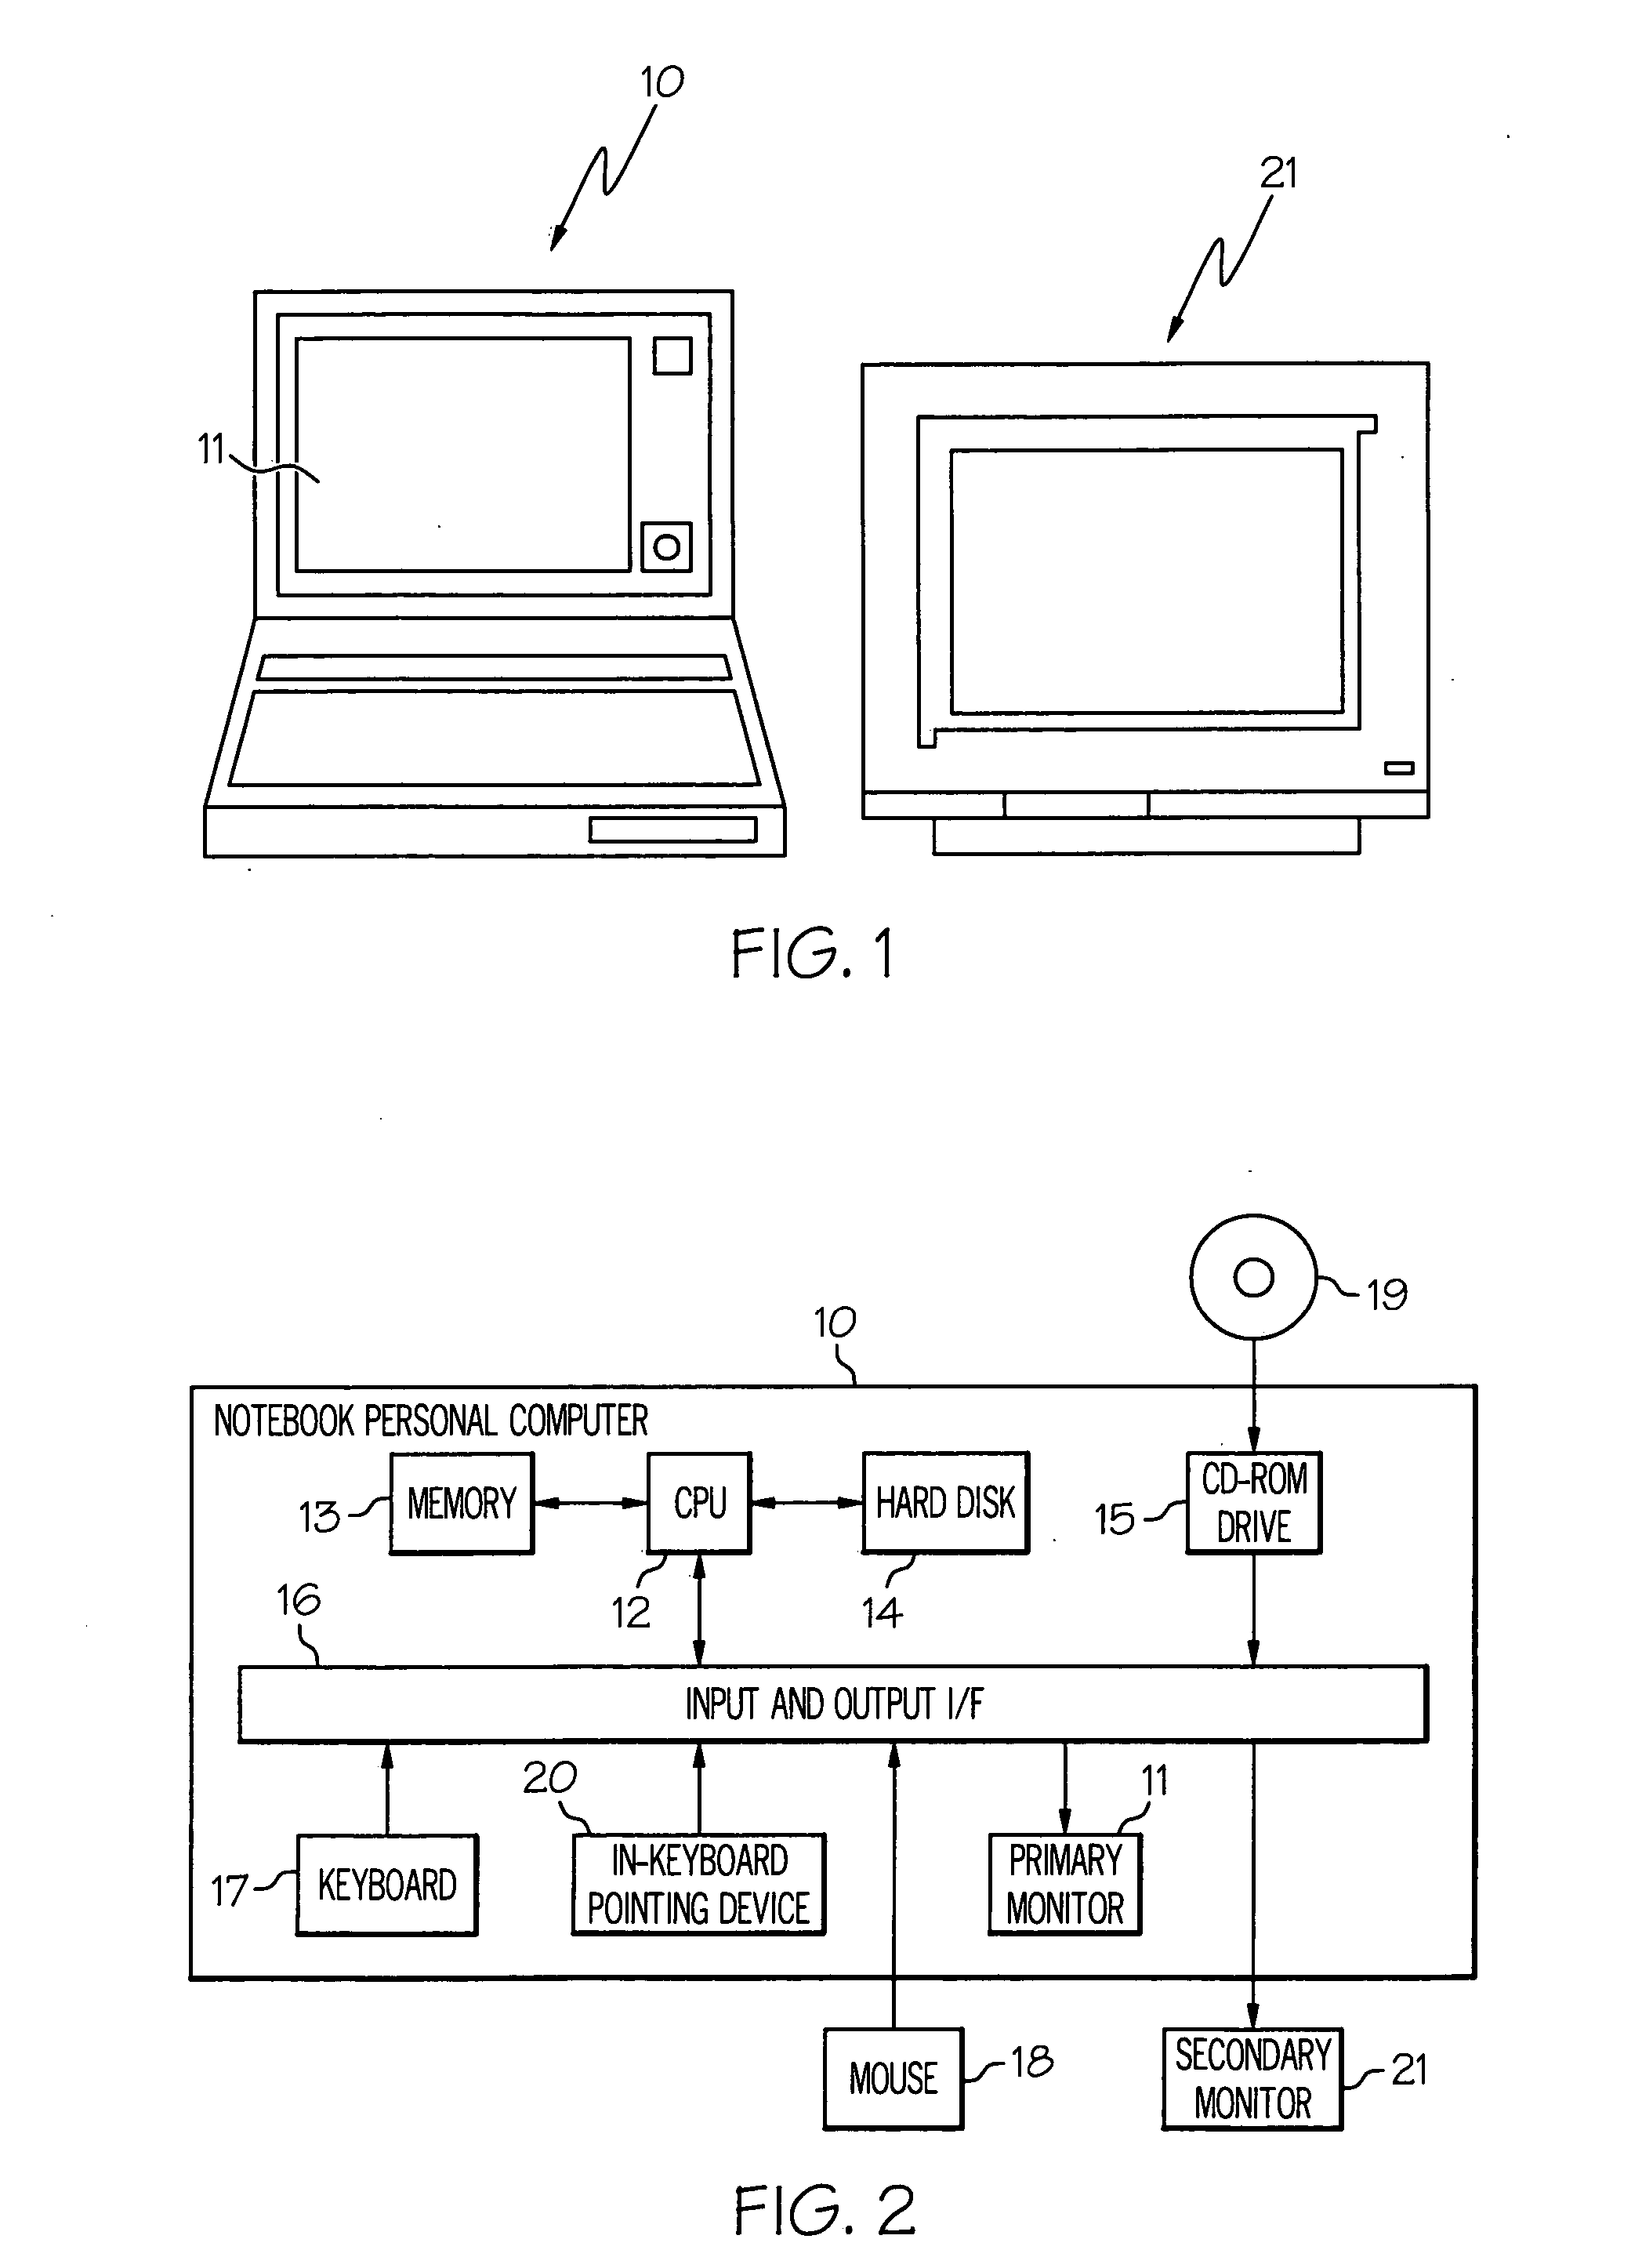 System and method for implementing a multi-monitor interface for a data processing system